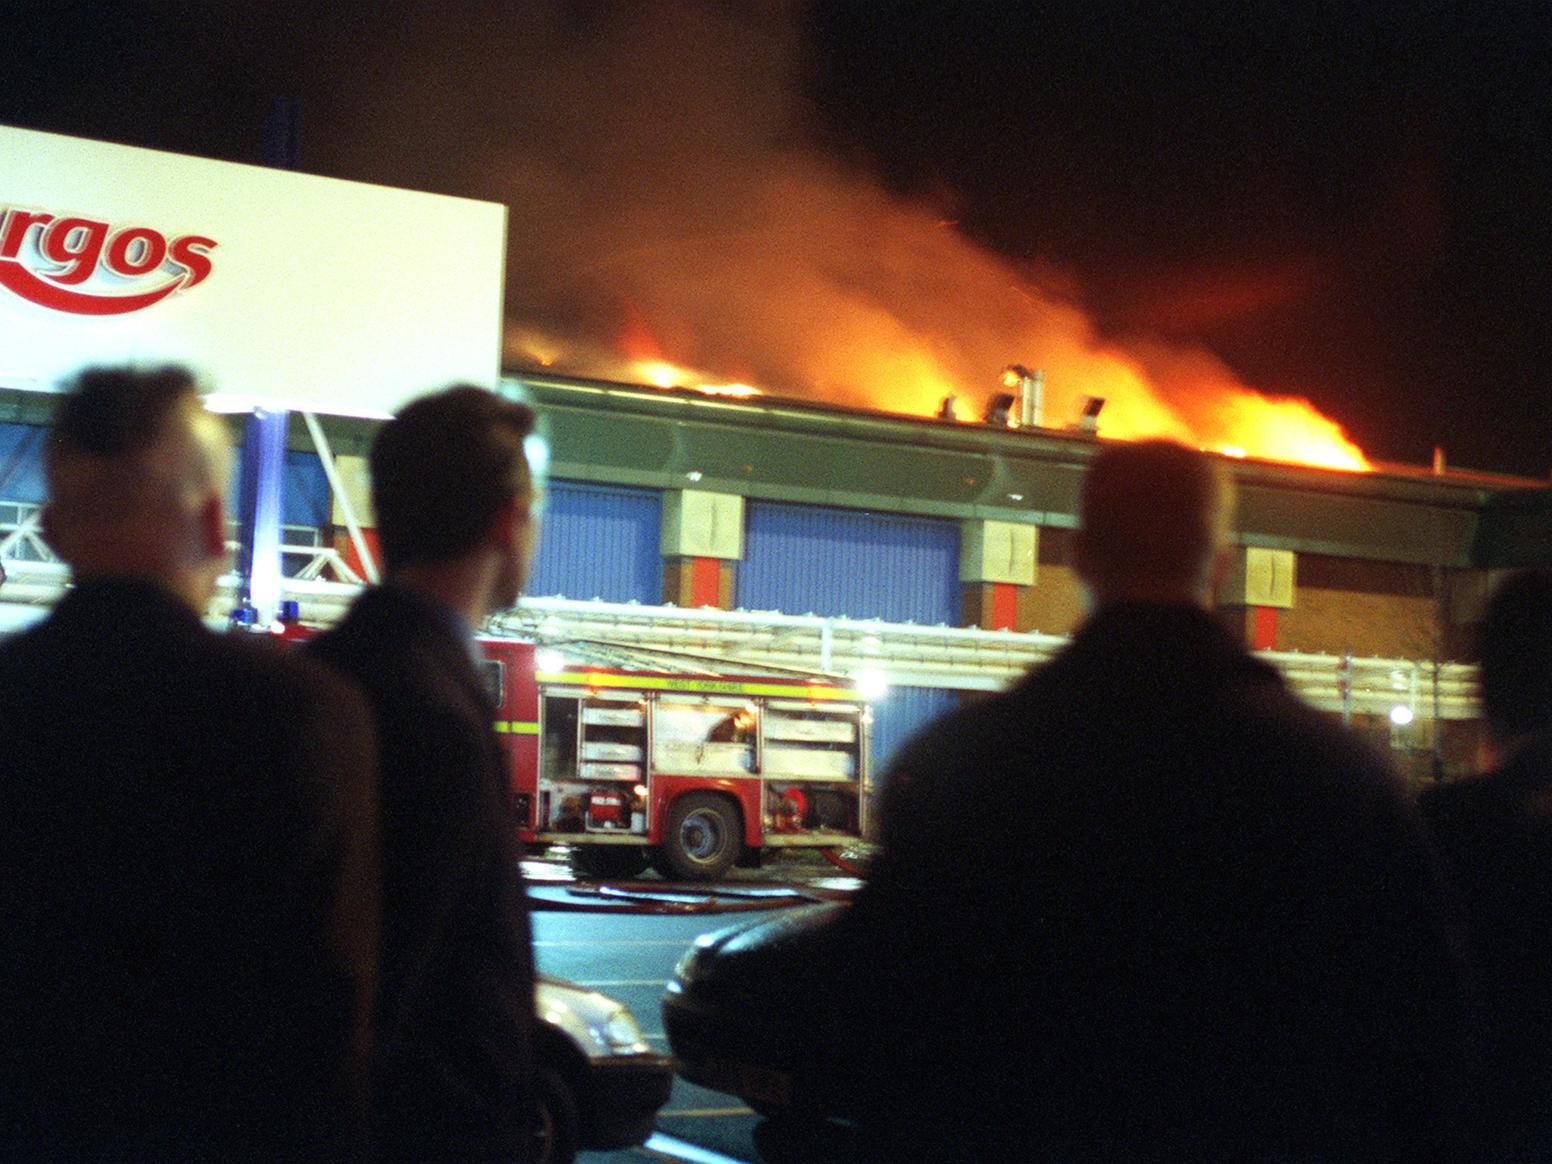 People gather to look at the fire engulfing the Argos Superstore at the Crown Point Retail Park in Leeds.